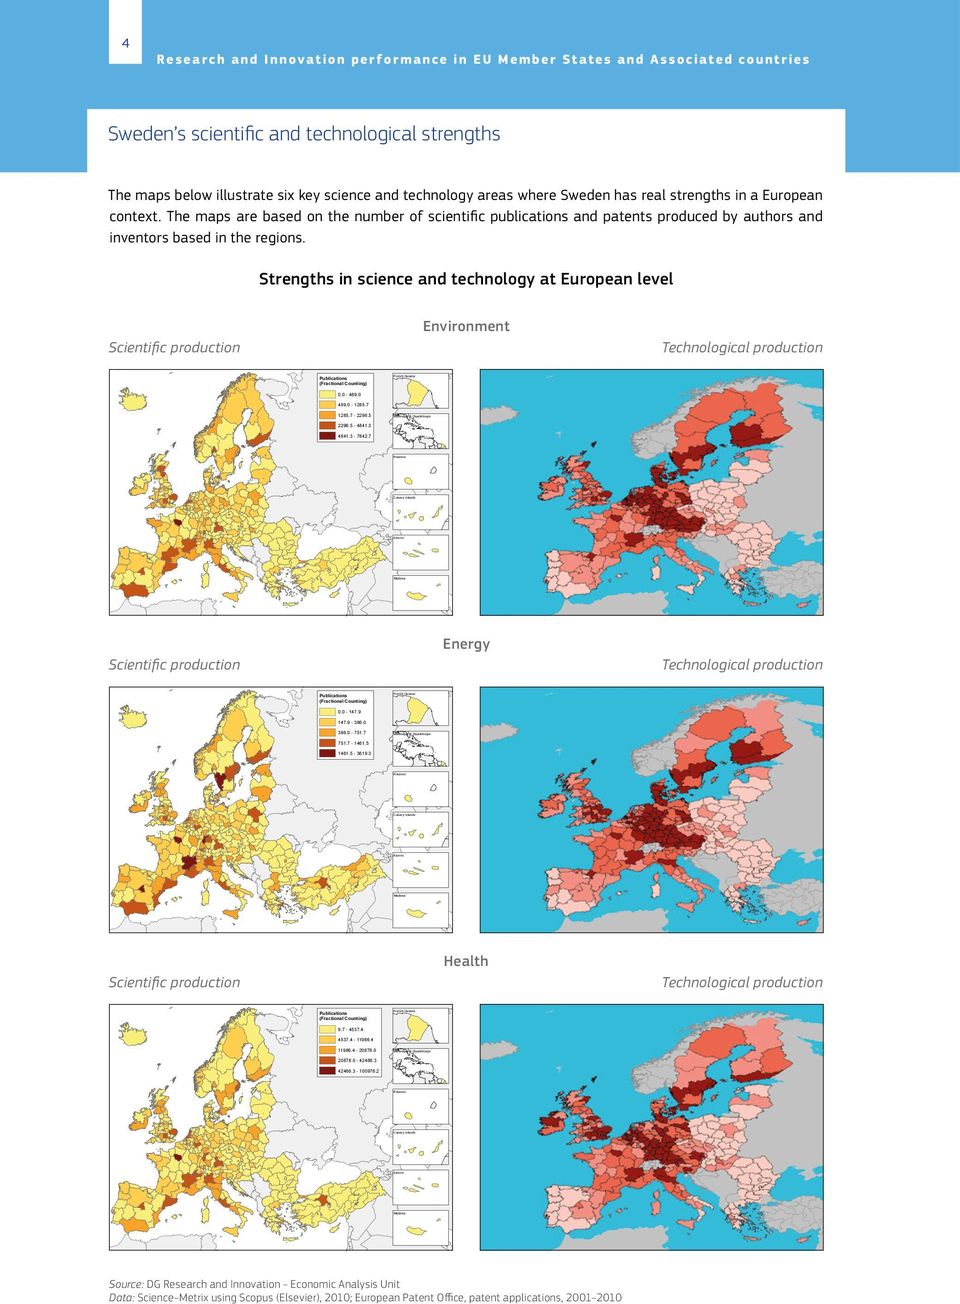 Strengths in science and technology at European level Environment Technological production Scientifi c production Number of publications by NUTS2 regions of ERA countries Environment (including